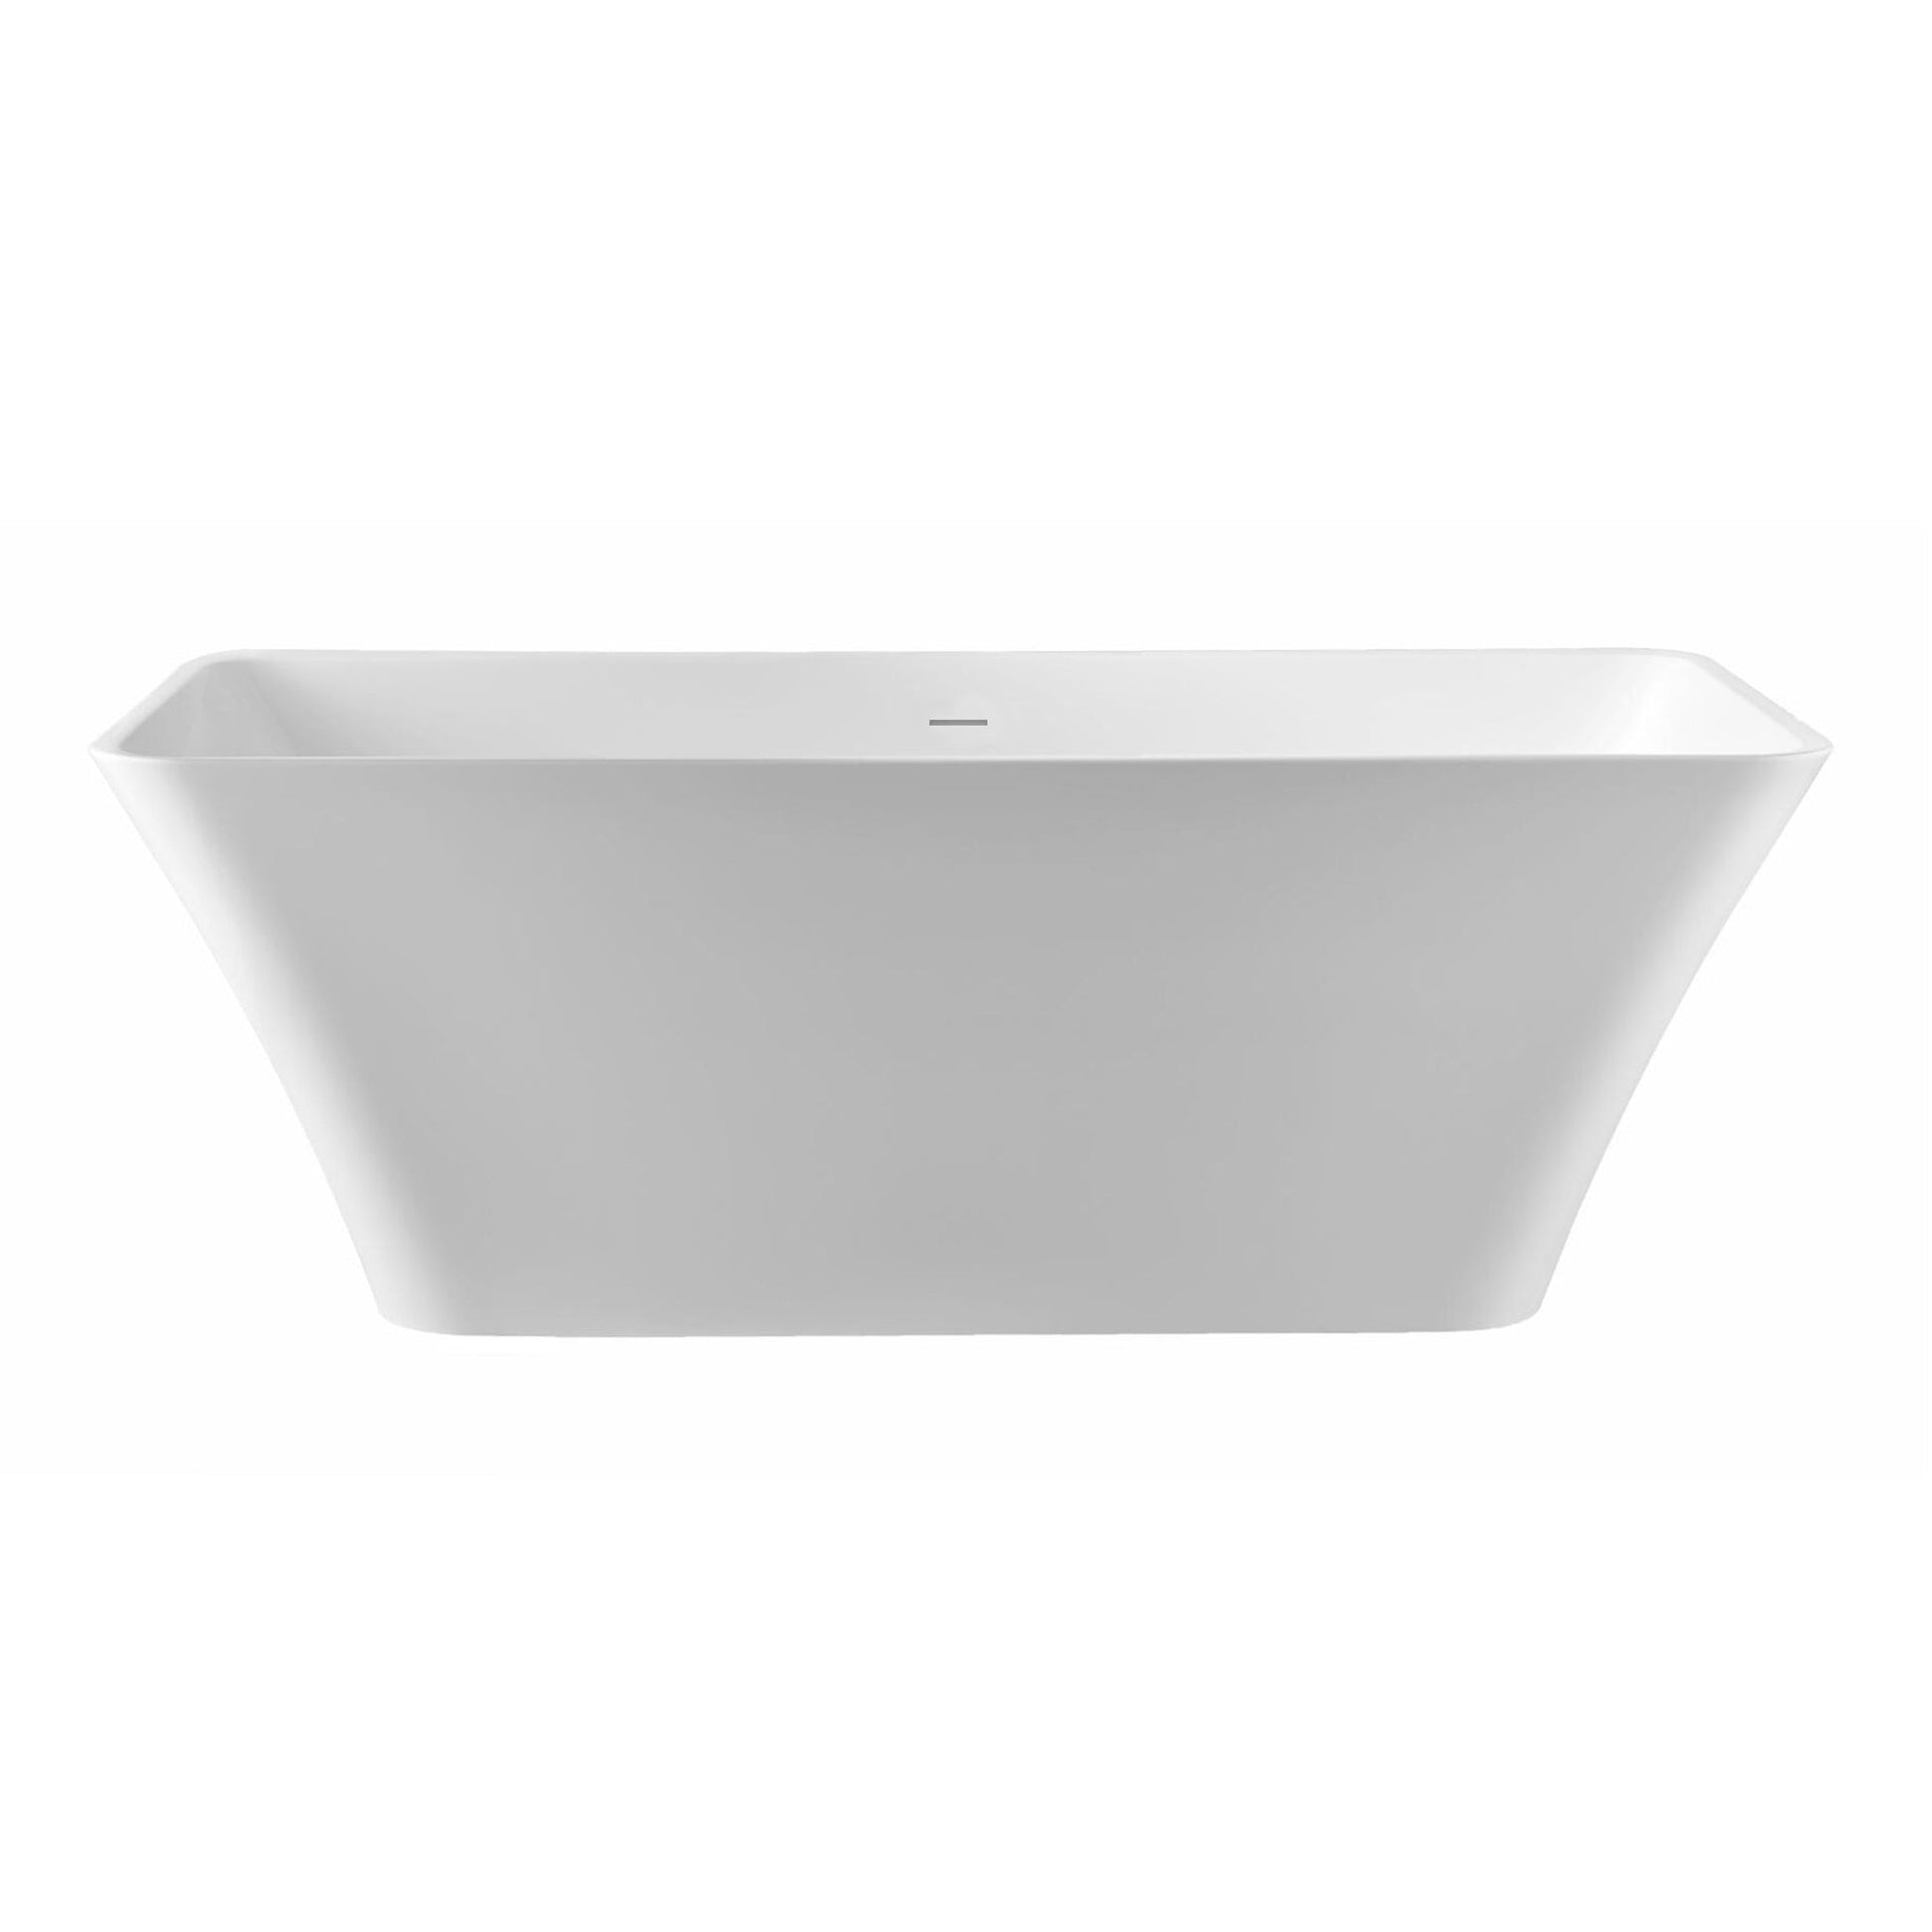 PULSE ShowerSpas 67" W x 32" D Polished White Acrylic Rectangular Freestanding Tub With Stainless Steel Brackets